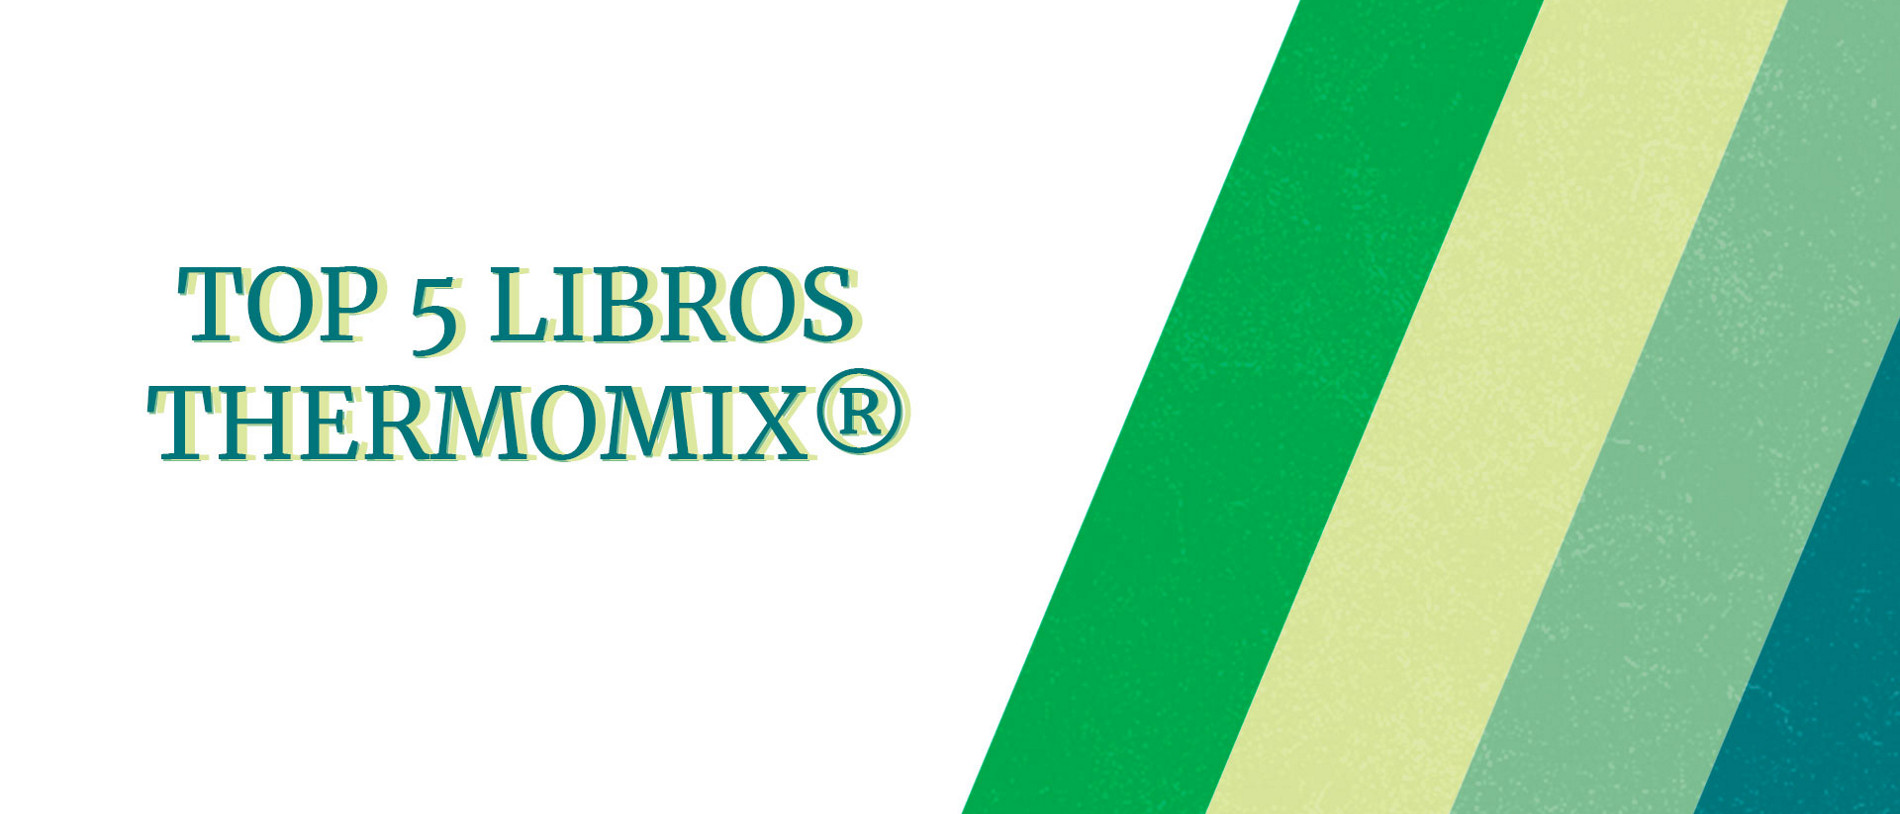 TOP 5 LIBROS THERMOMIX